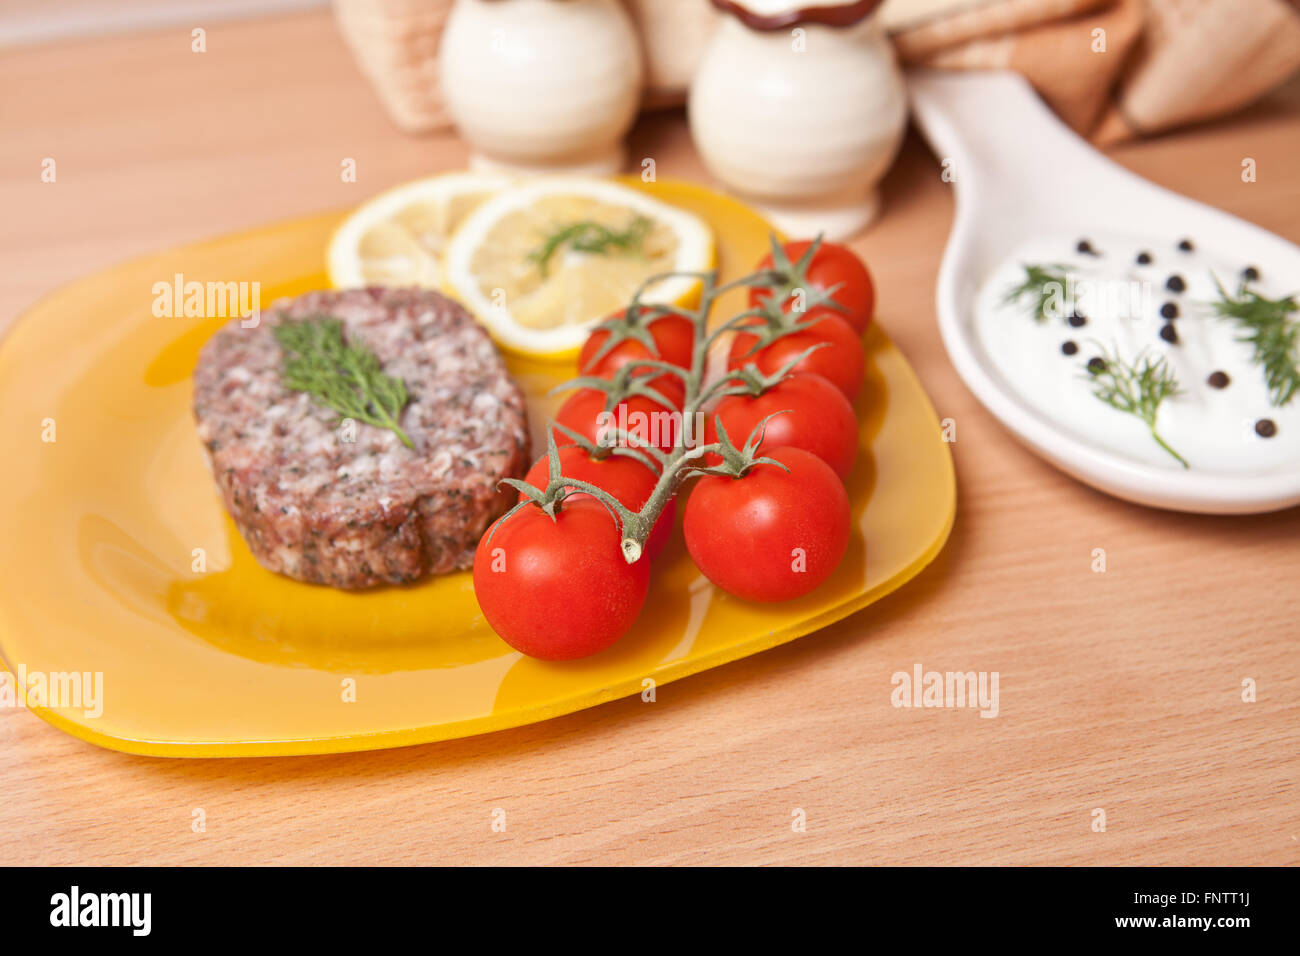 cutlet on a plate with cherry tomatoes Stock Photo